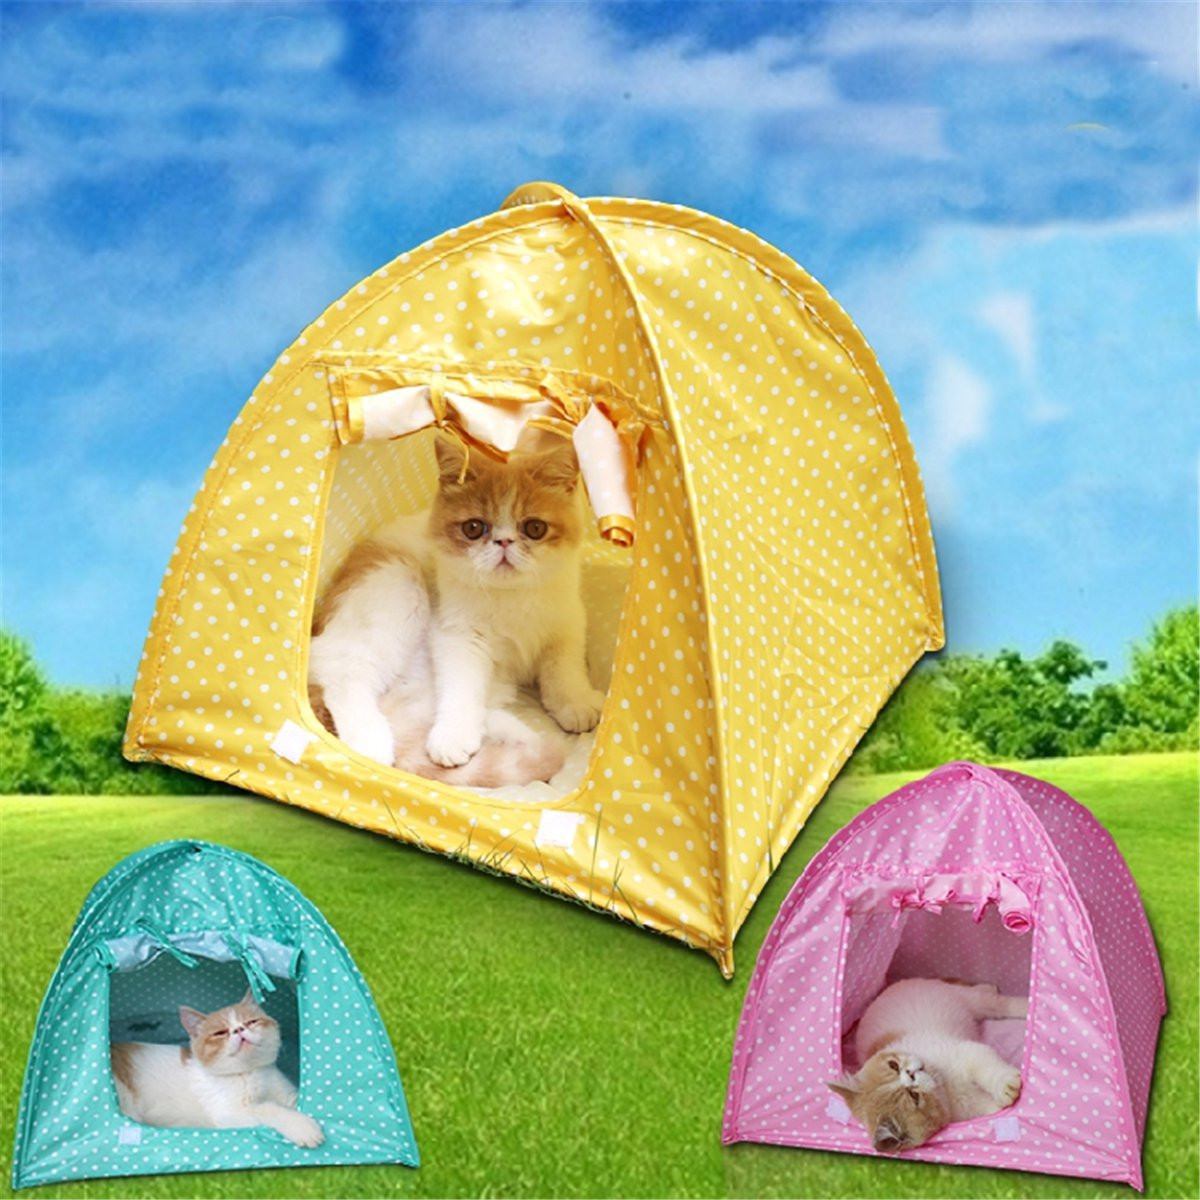 Collapsible pet tent